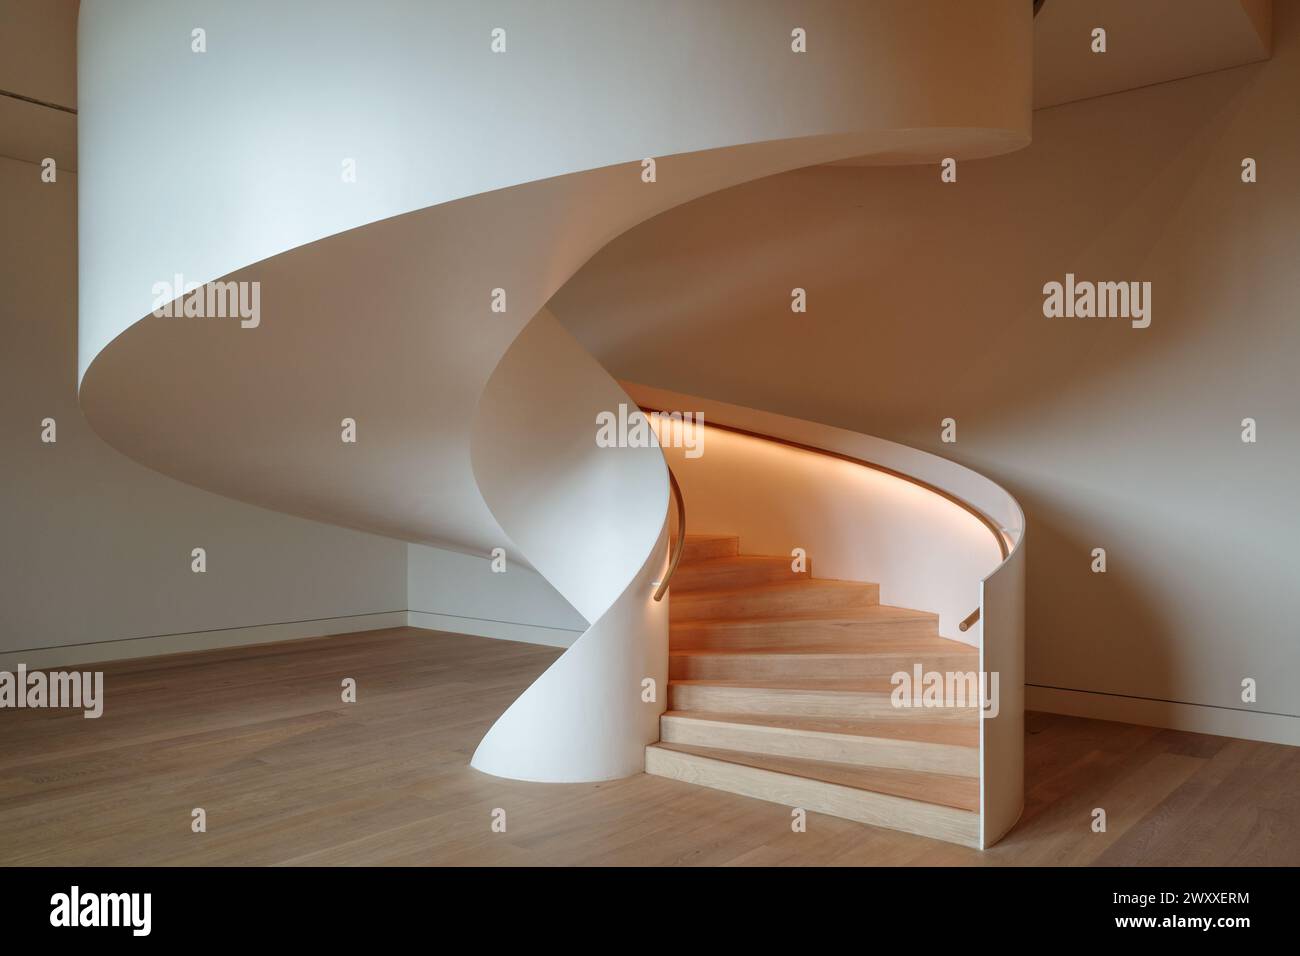 An exquisite view of a modern spiral staircase, encapsulating the sleek and minimalist aesthetic of contemporary architecture. Stock Photo